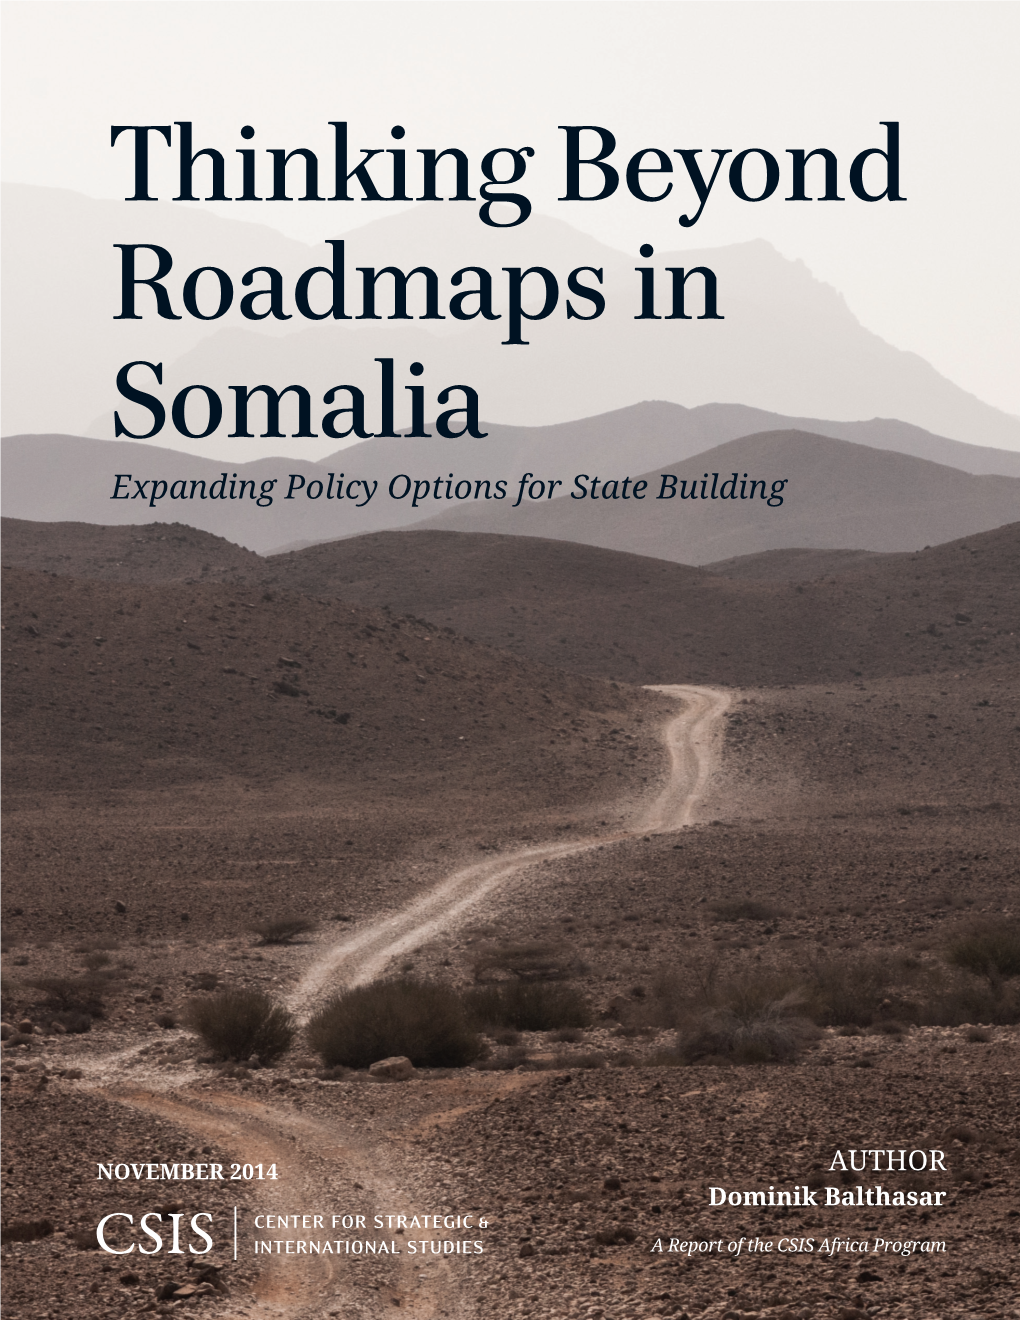 Thinking Beyond Roadmaps in Somalia Expanding Policy Options for State Building